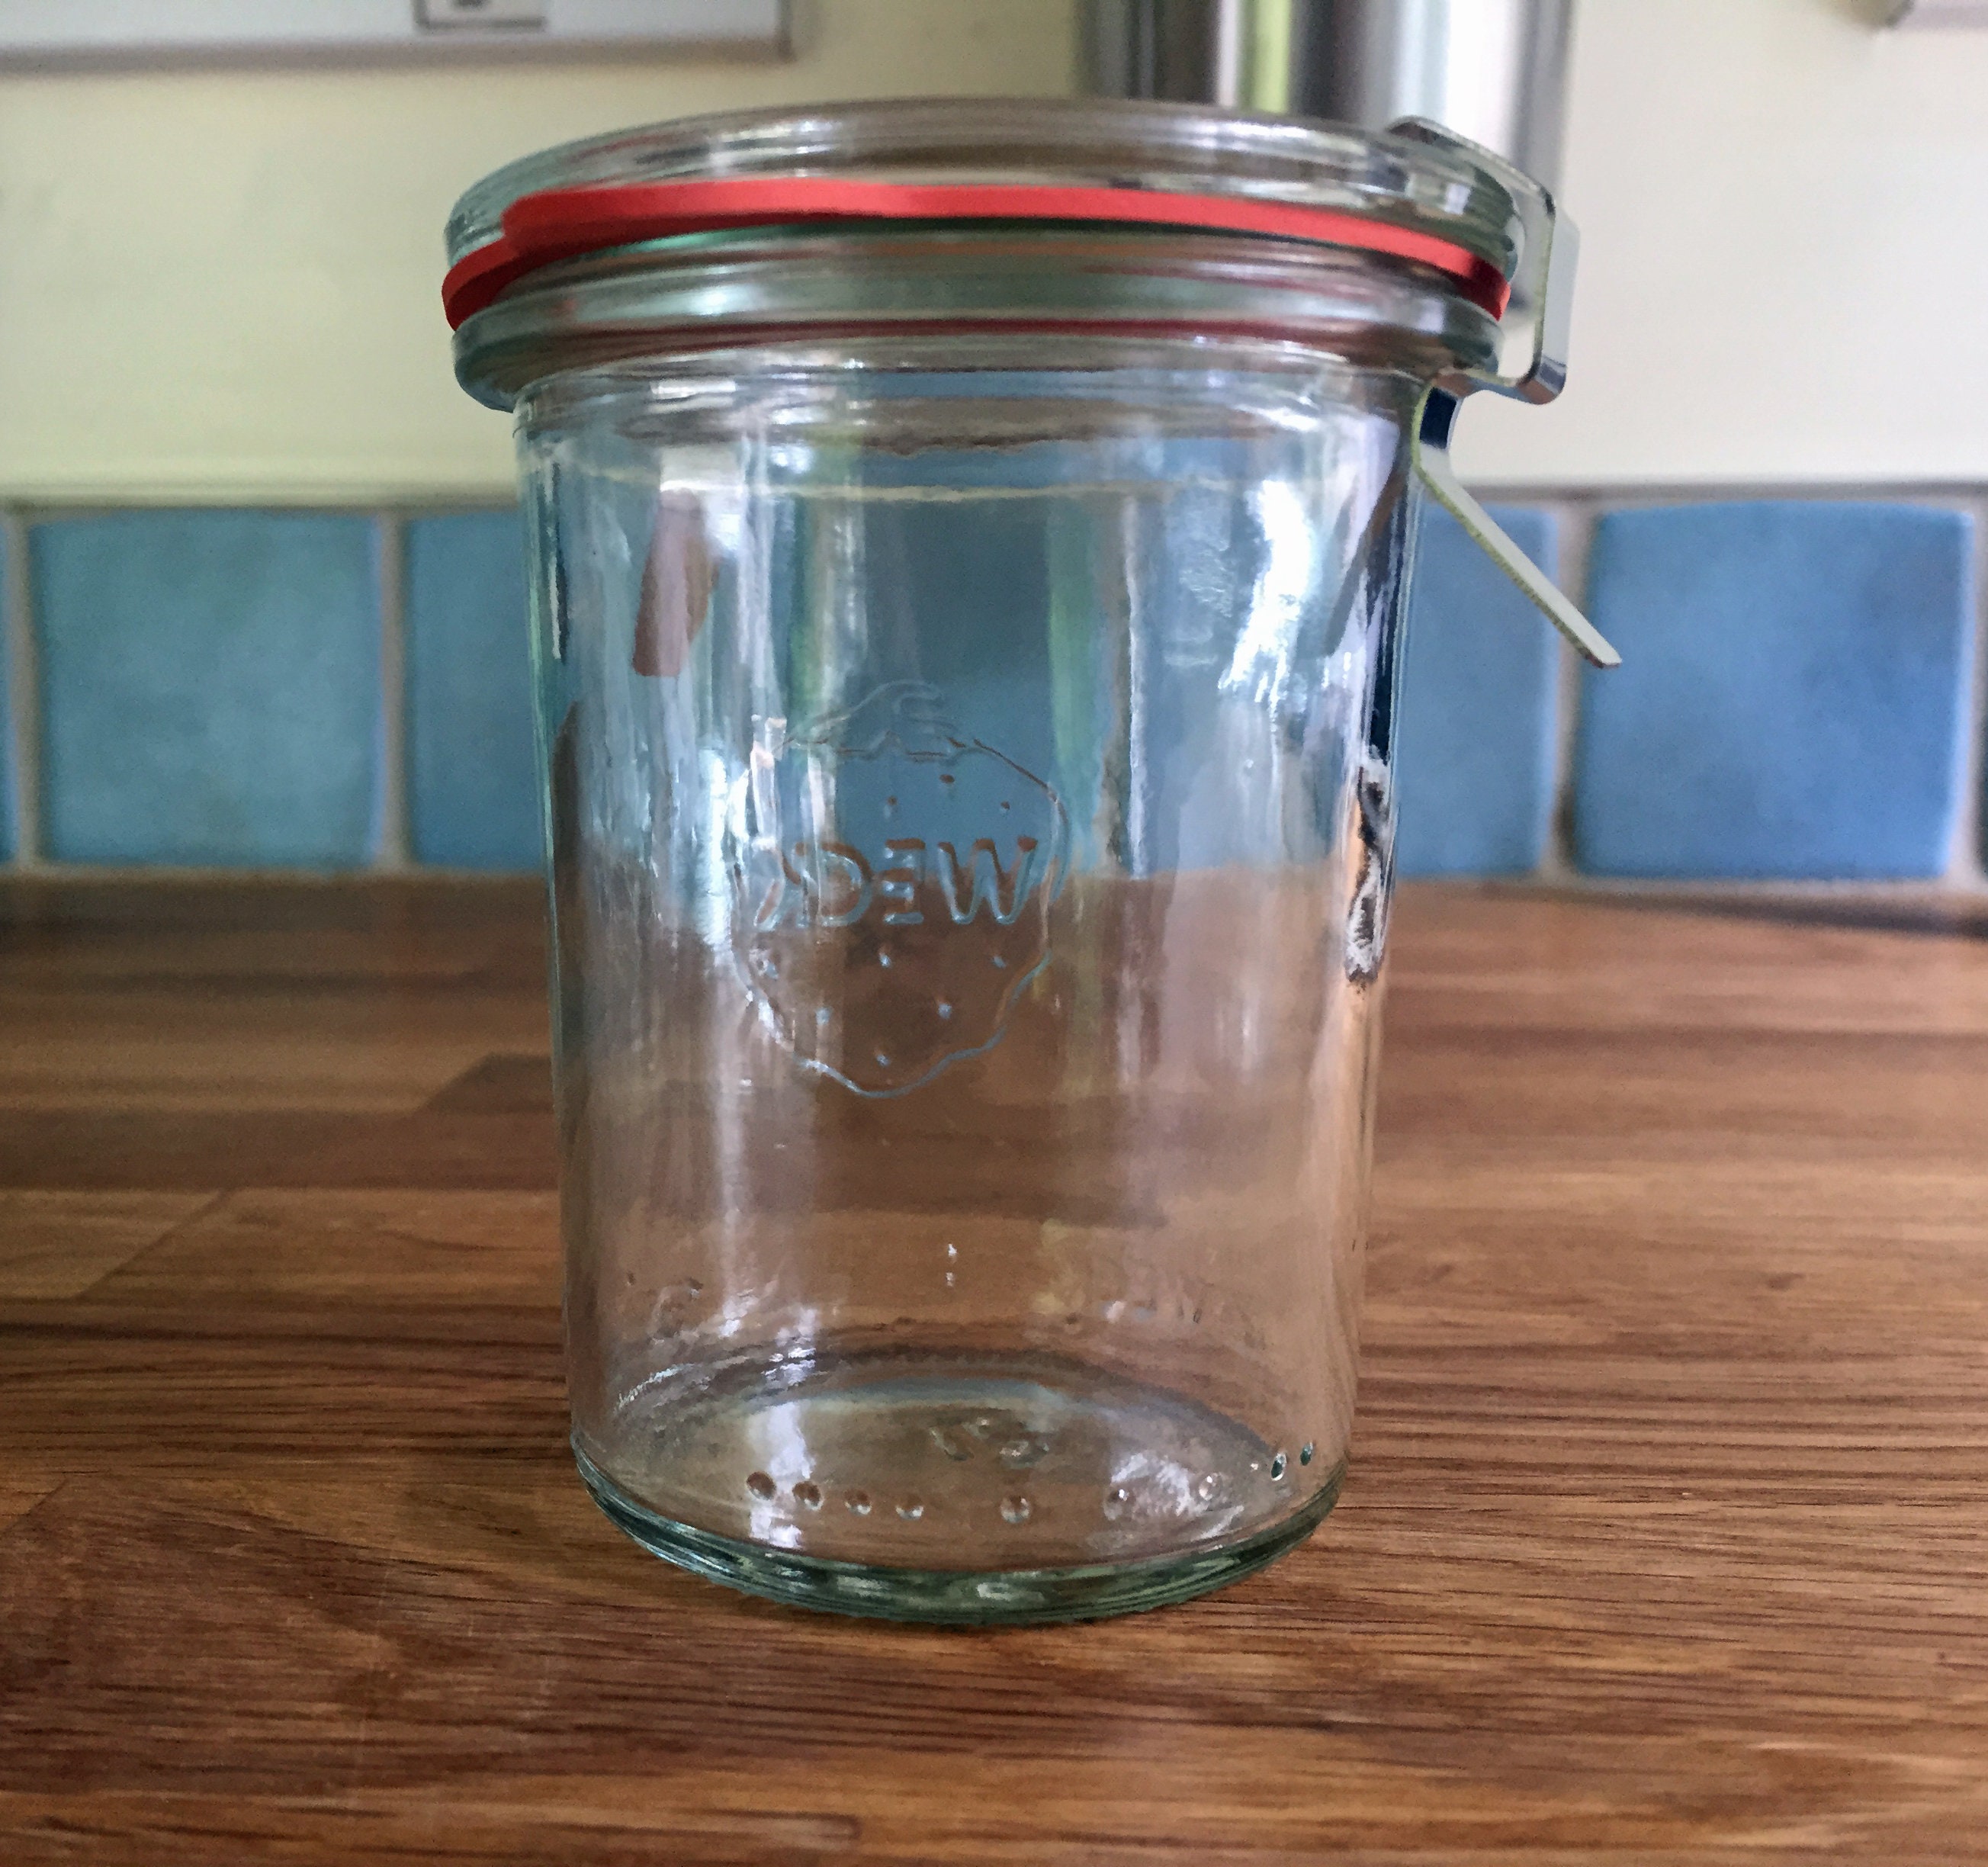 Storage cabinet for mason jars, great for homemade fermented foods! My  friend's husband made i…